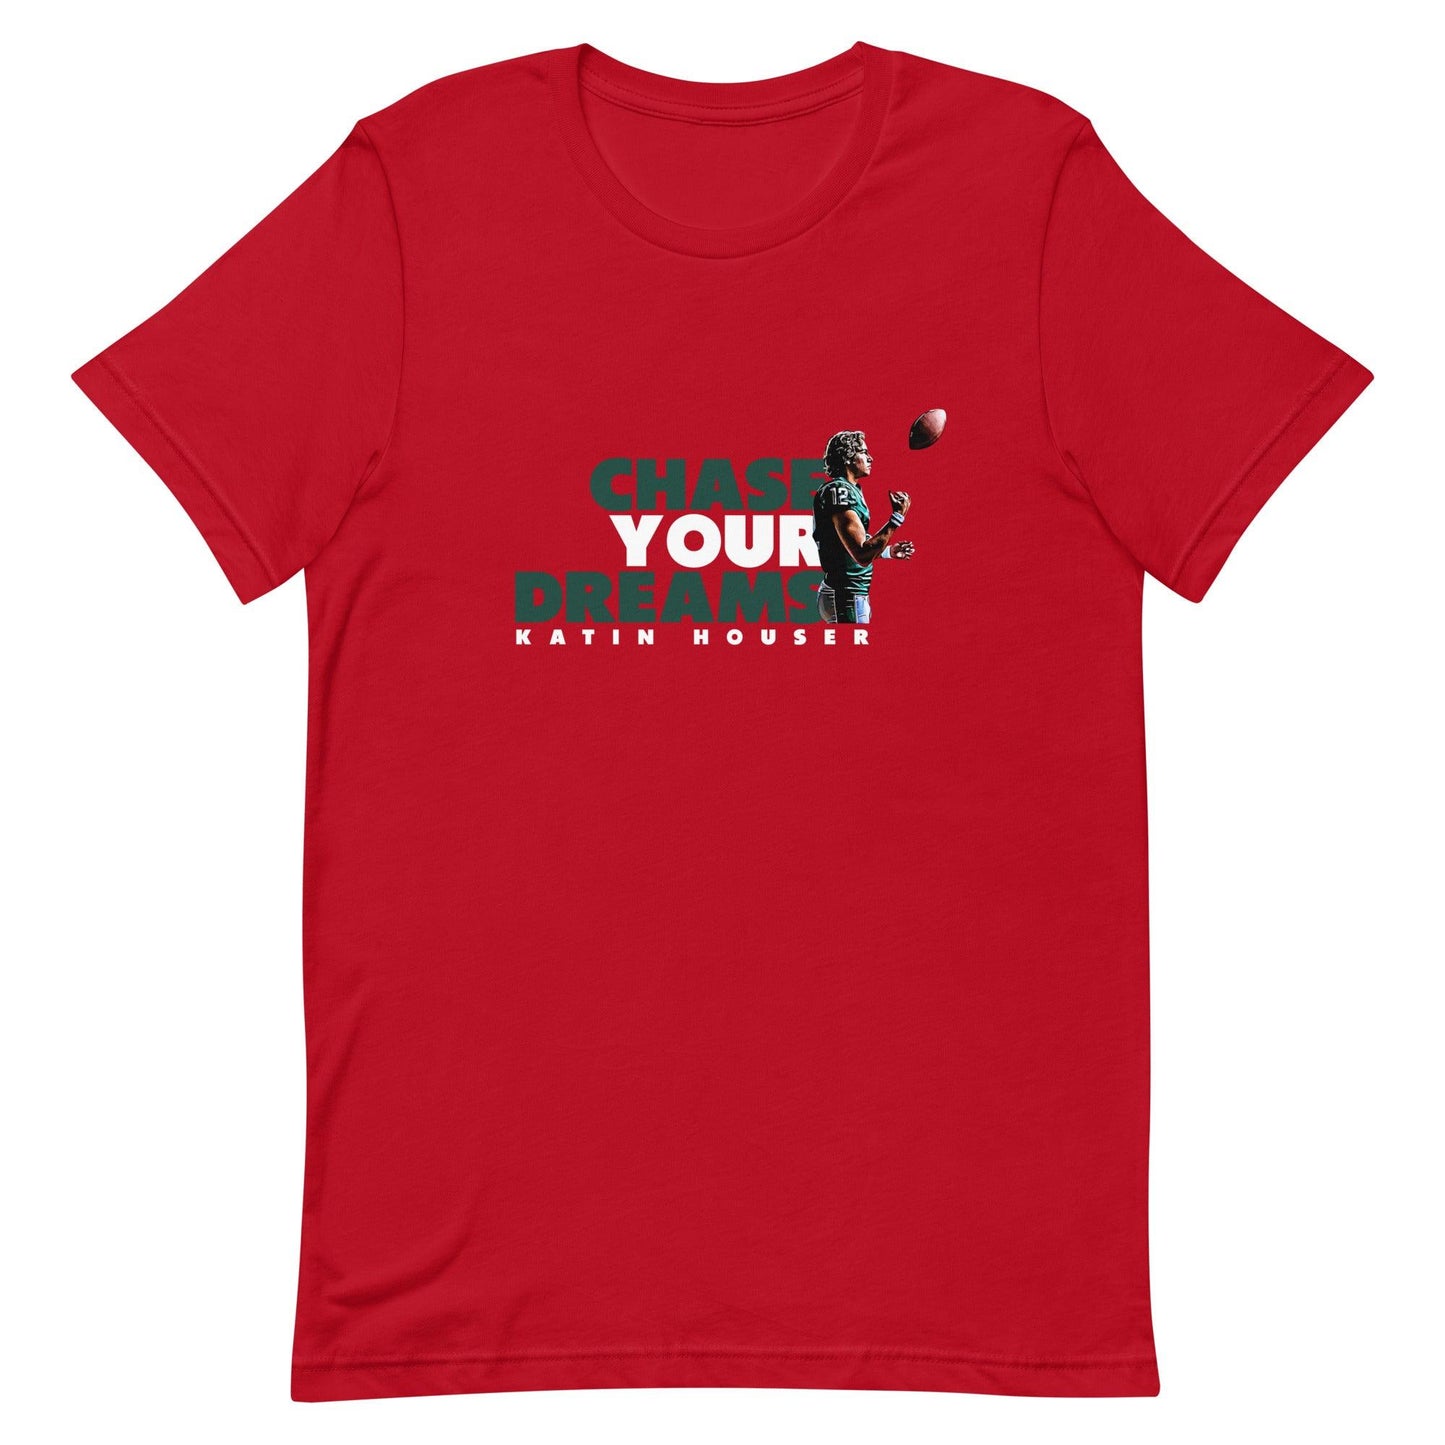 Katin Houser "Chase Your Dreams" t-shirt - Fan Arch